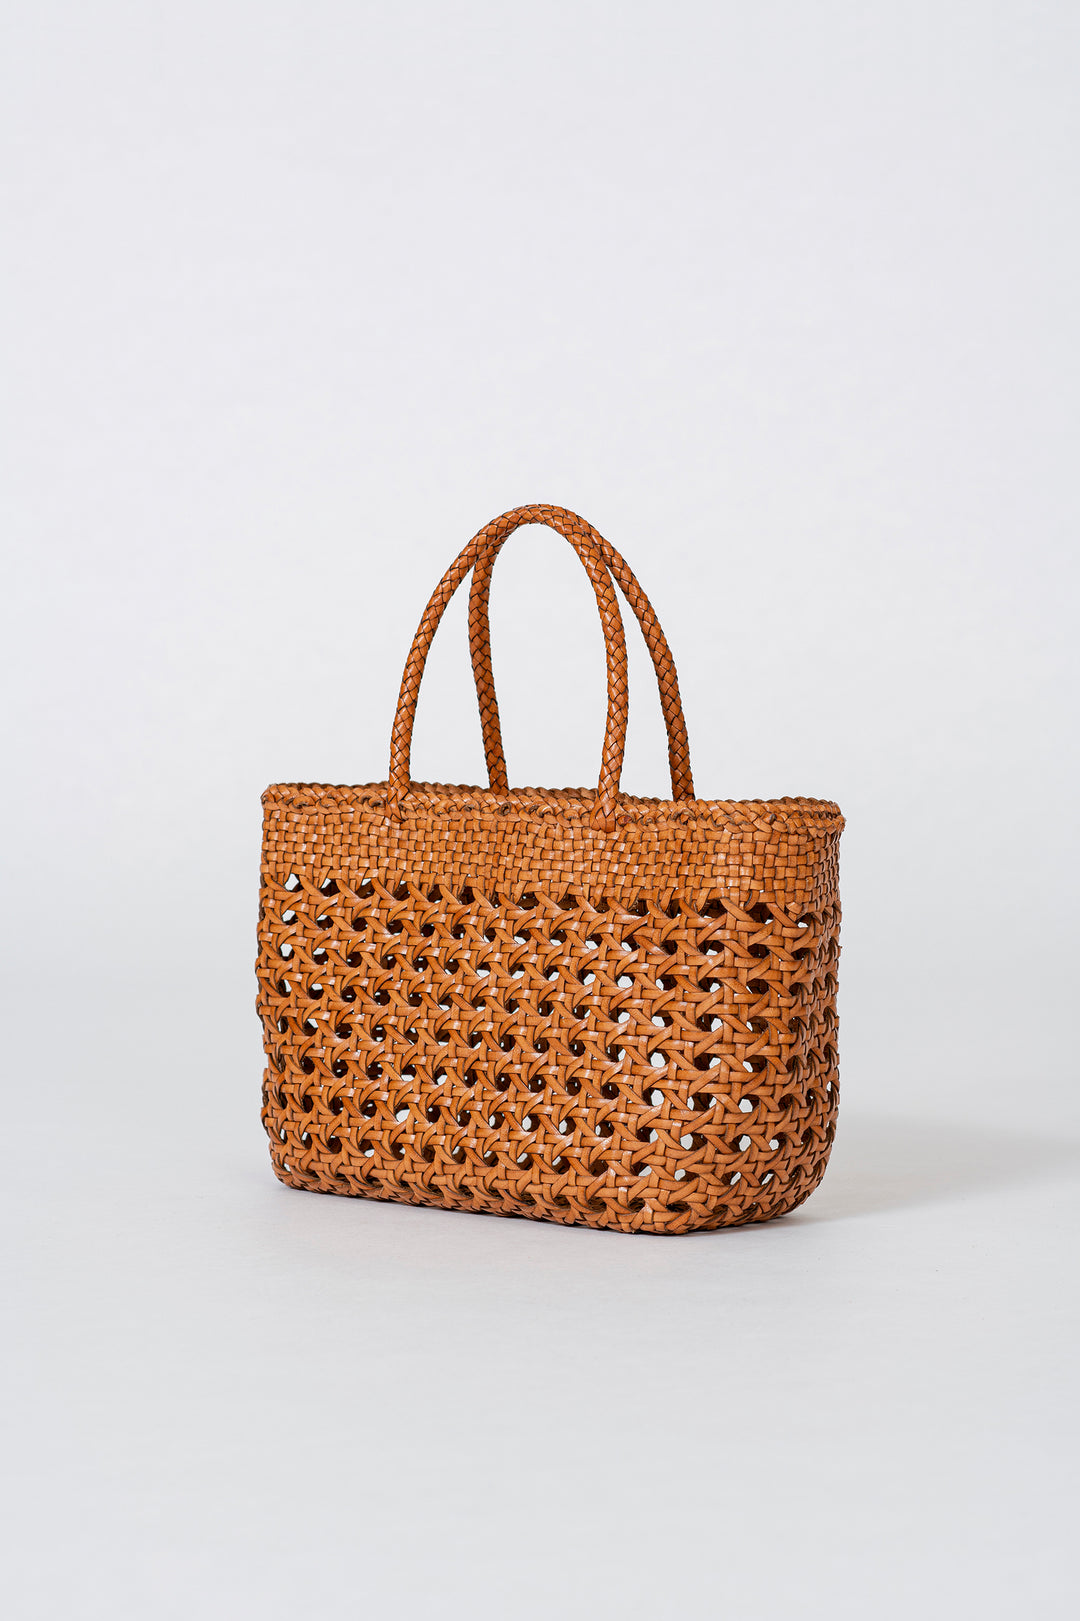 Dragon Diffusion woven leather bag handmade - Cannage Kanpur Small